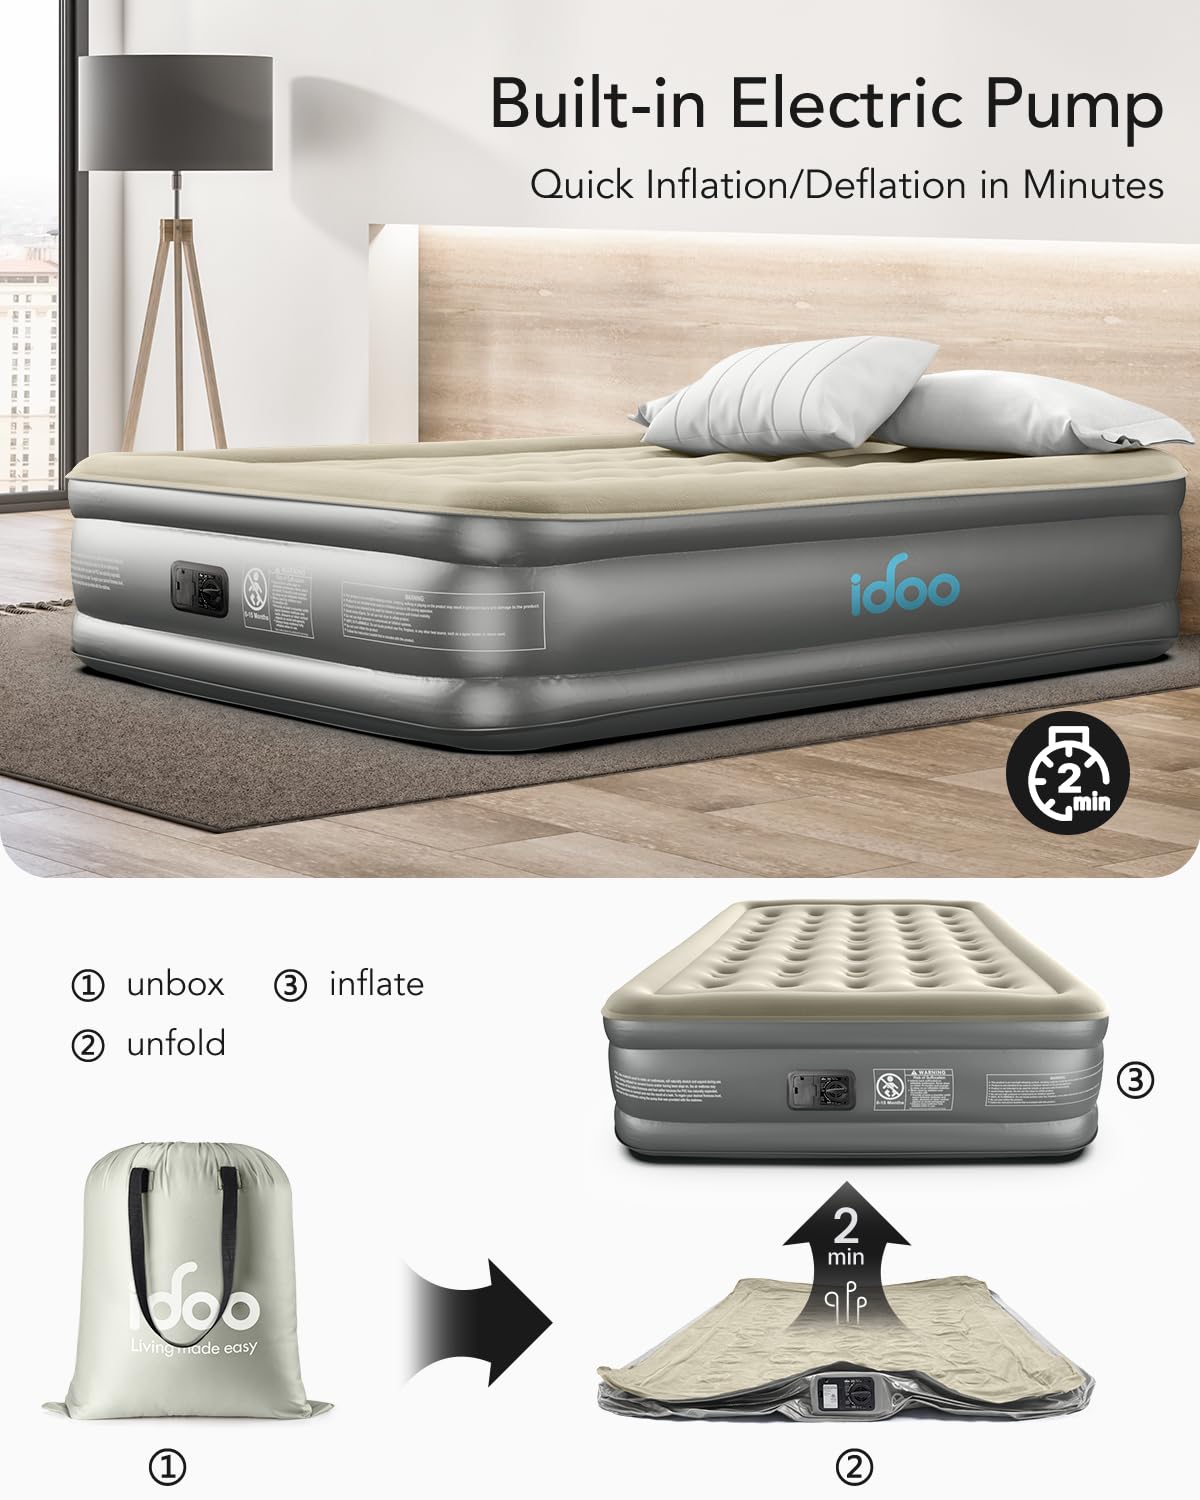 Queen Size 18" Air Mattress with Built in Pump - Air Bed Best Seller by idoo